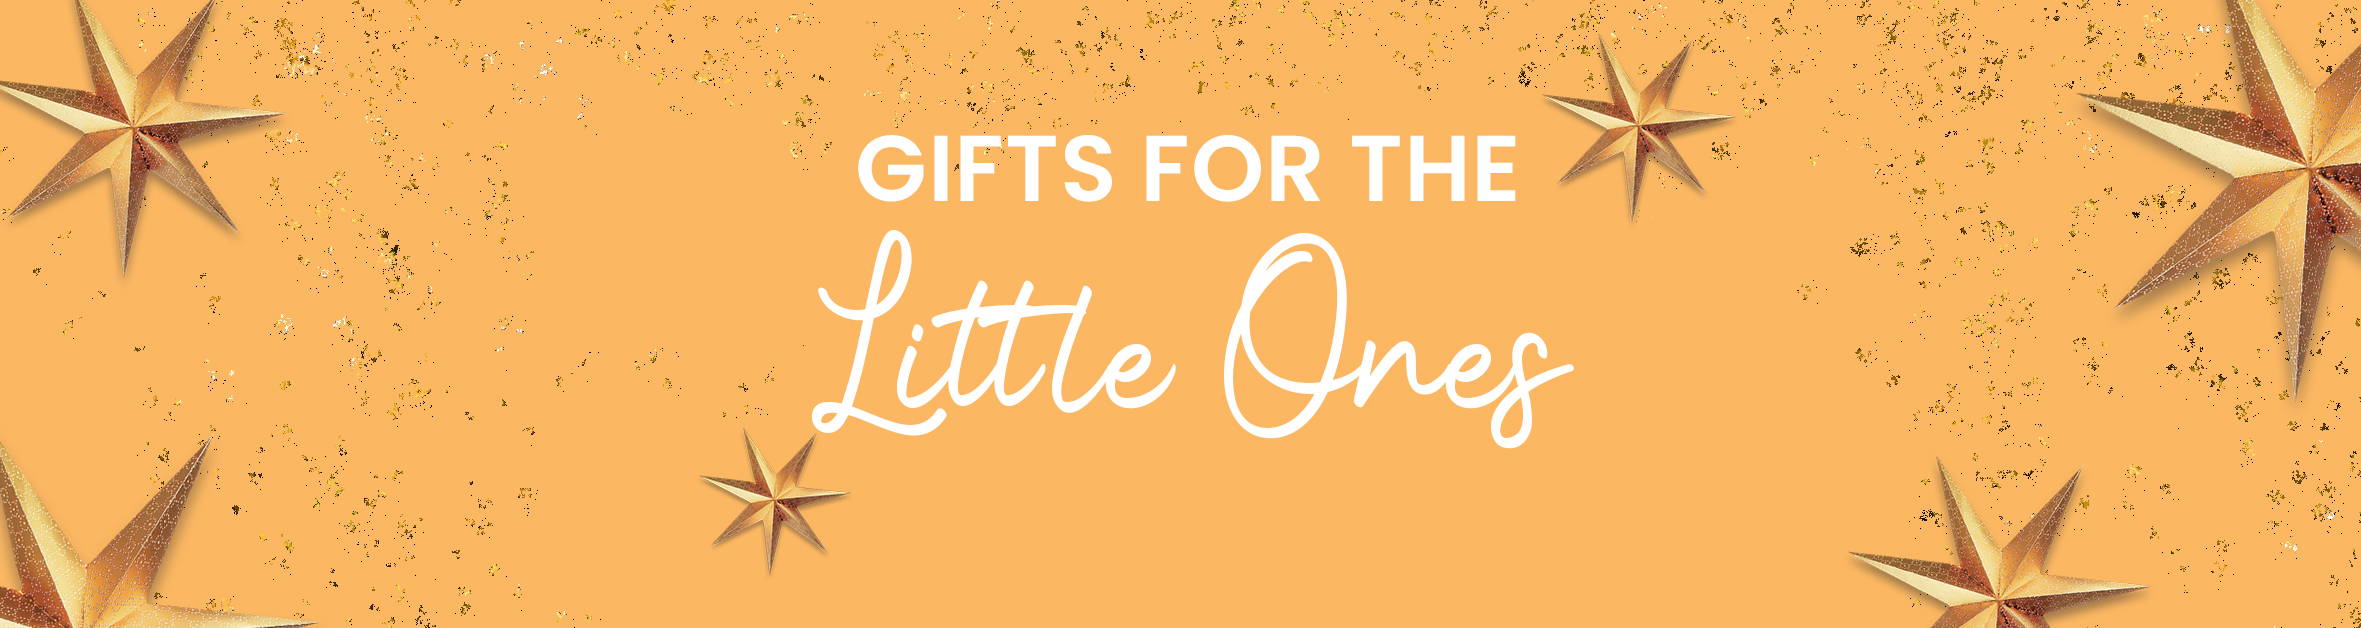 Holiday Gifts for the Little Ones